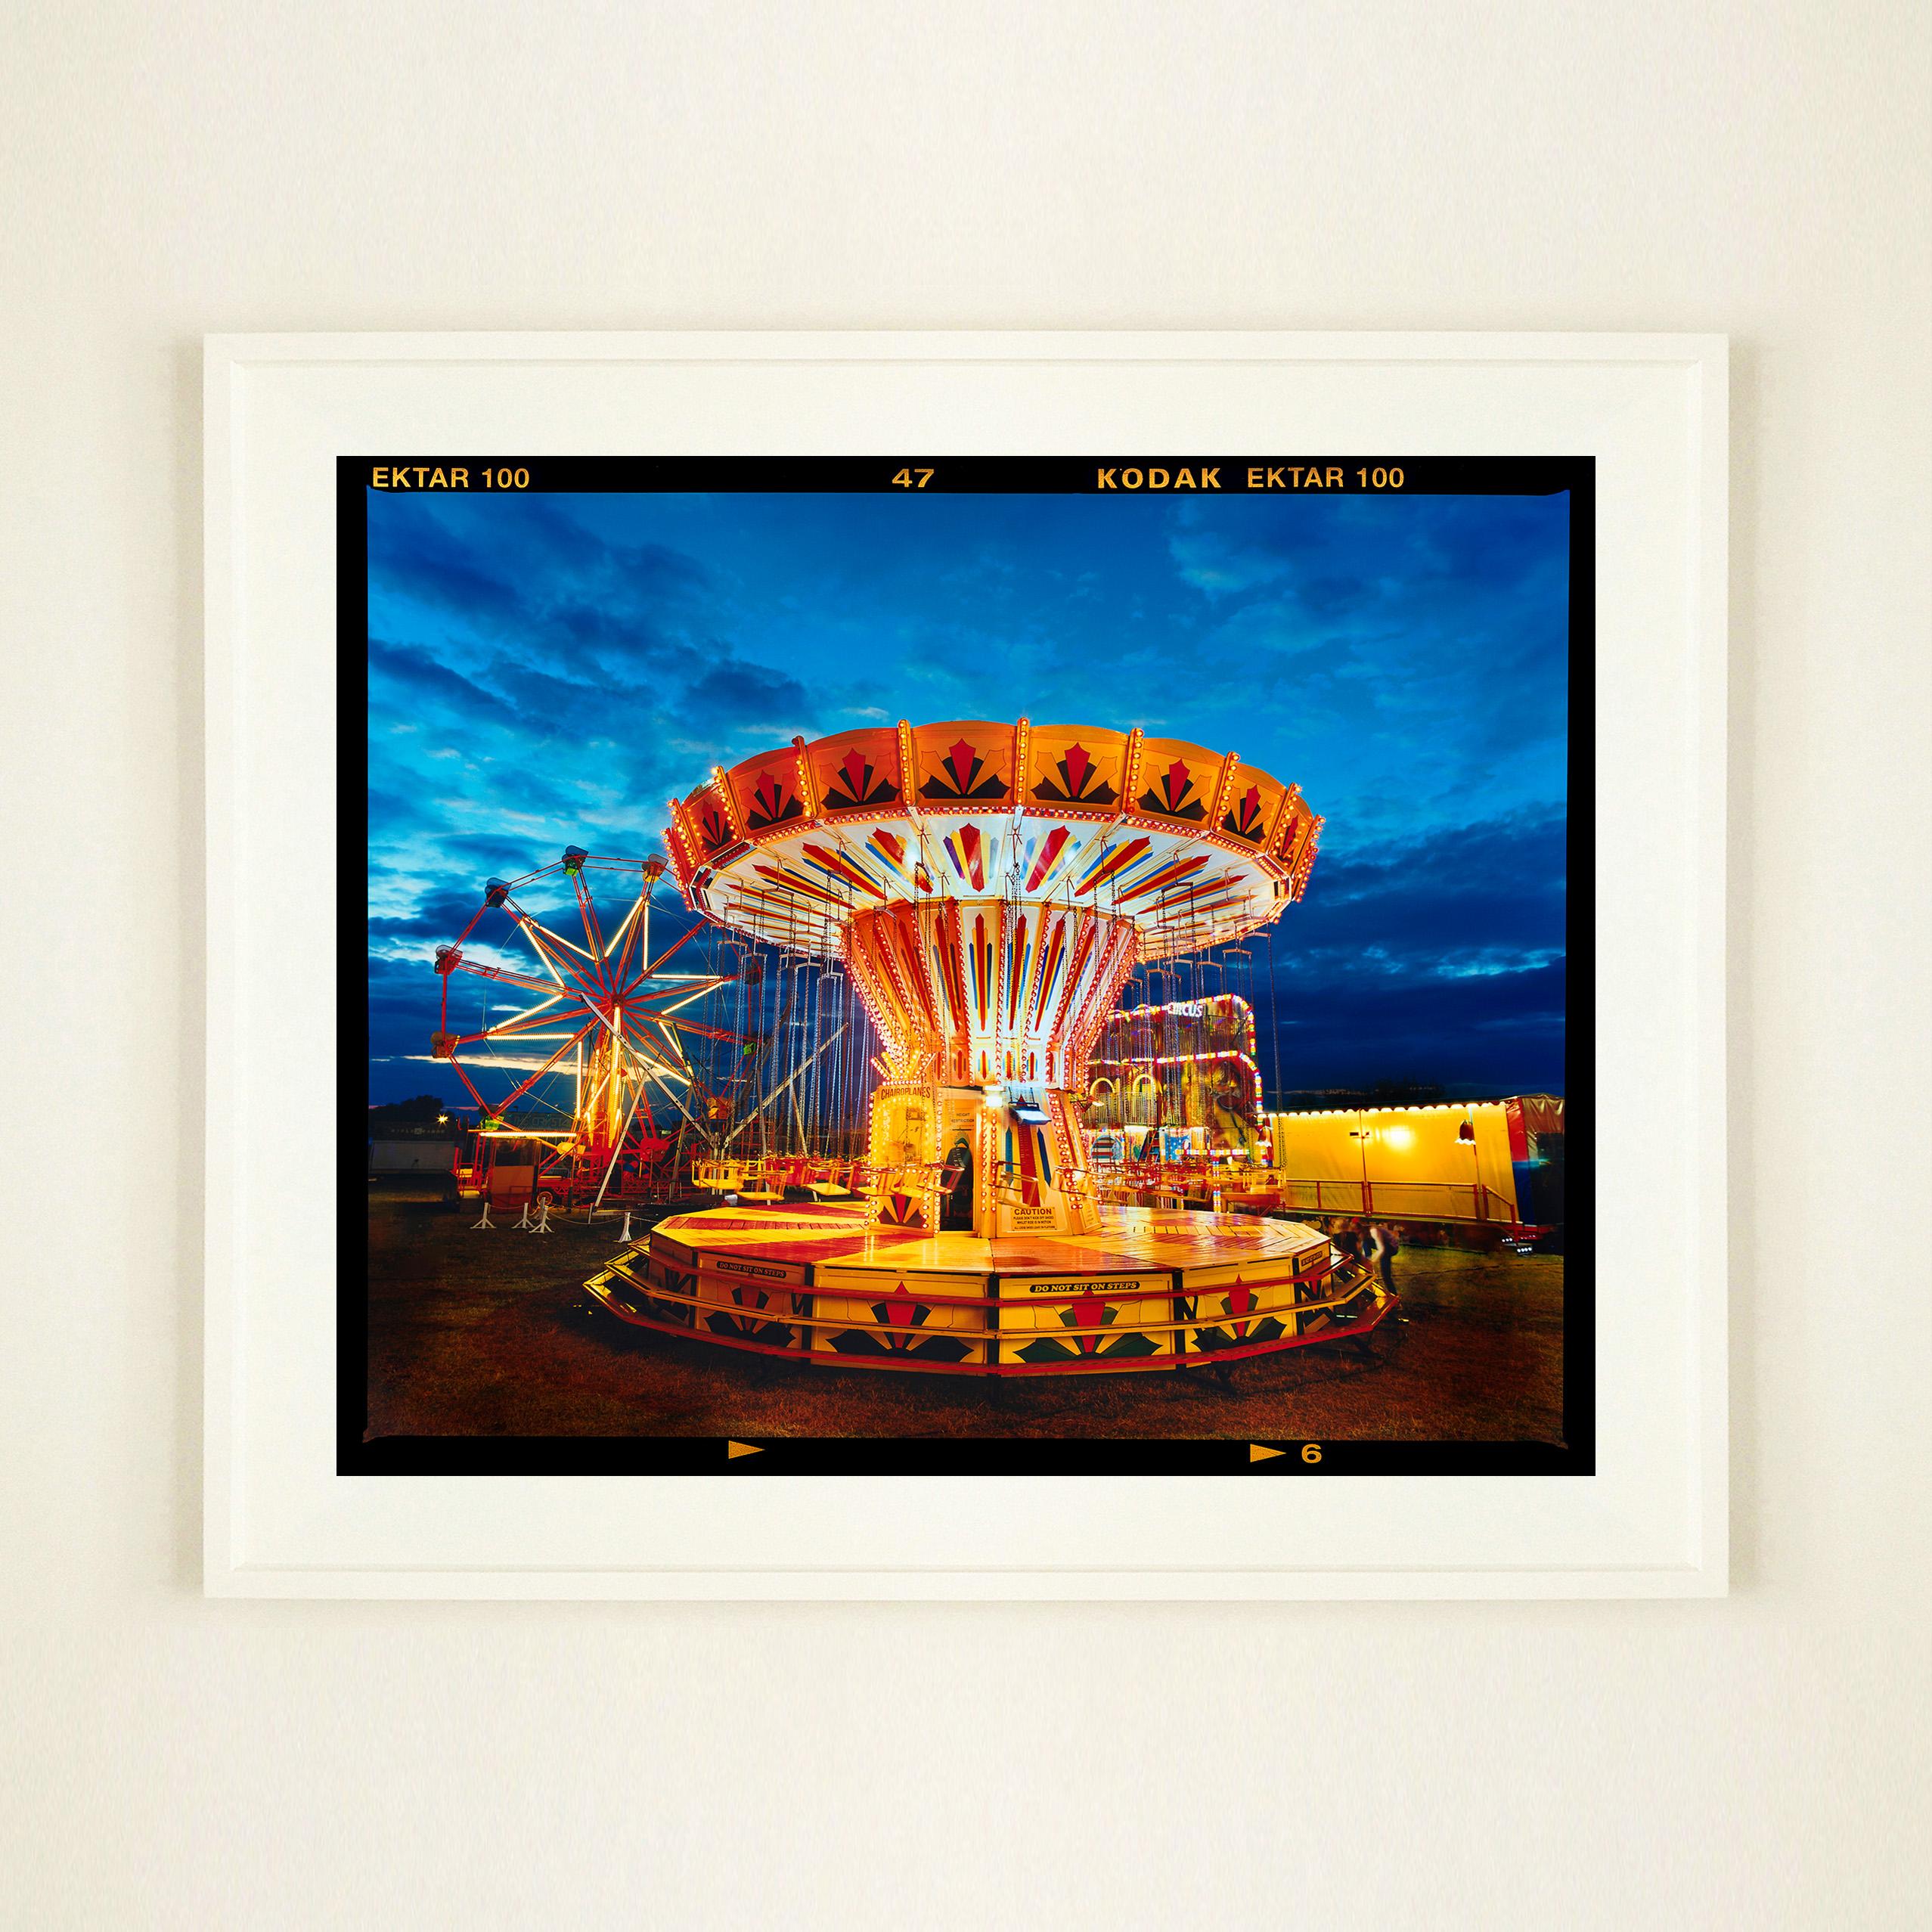 Photograph of a vintage fairground Chairoplane, lit up in a golden hue against the motion and beauty of the dark blue sky captures the magic of the 2022 Haddenham Steam Rally. Artwork from Richard Heeps autobiographical series, A View of the Fens